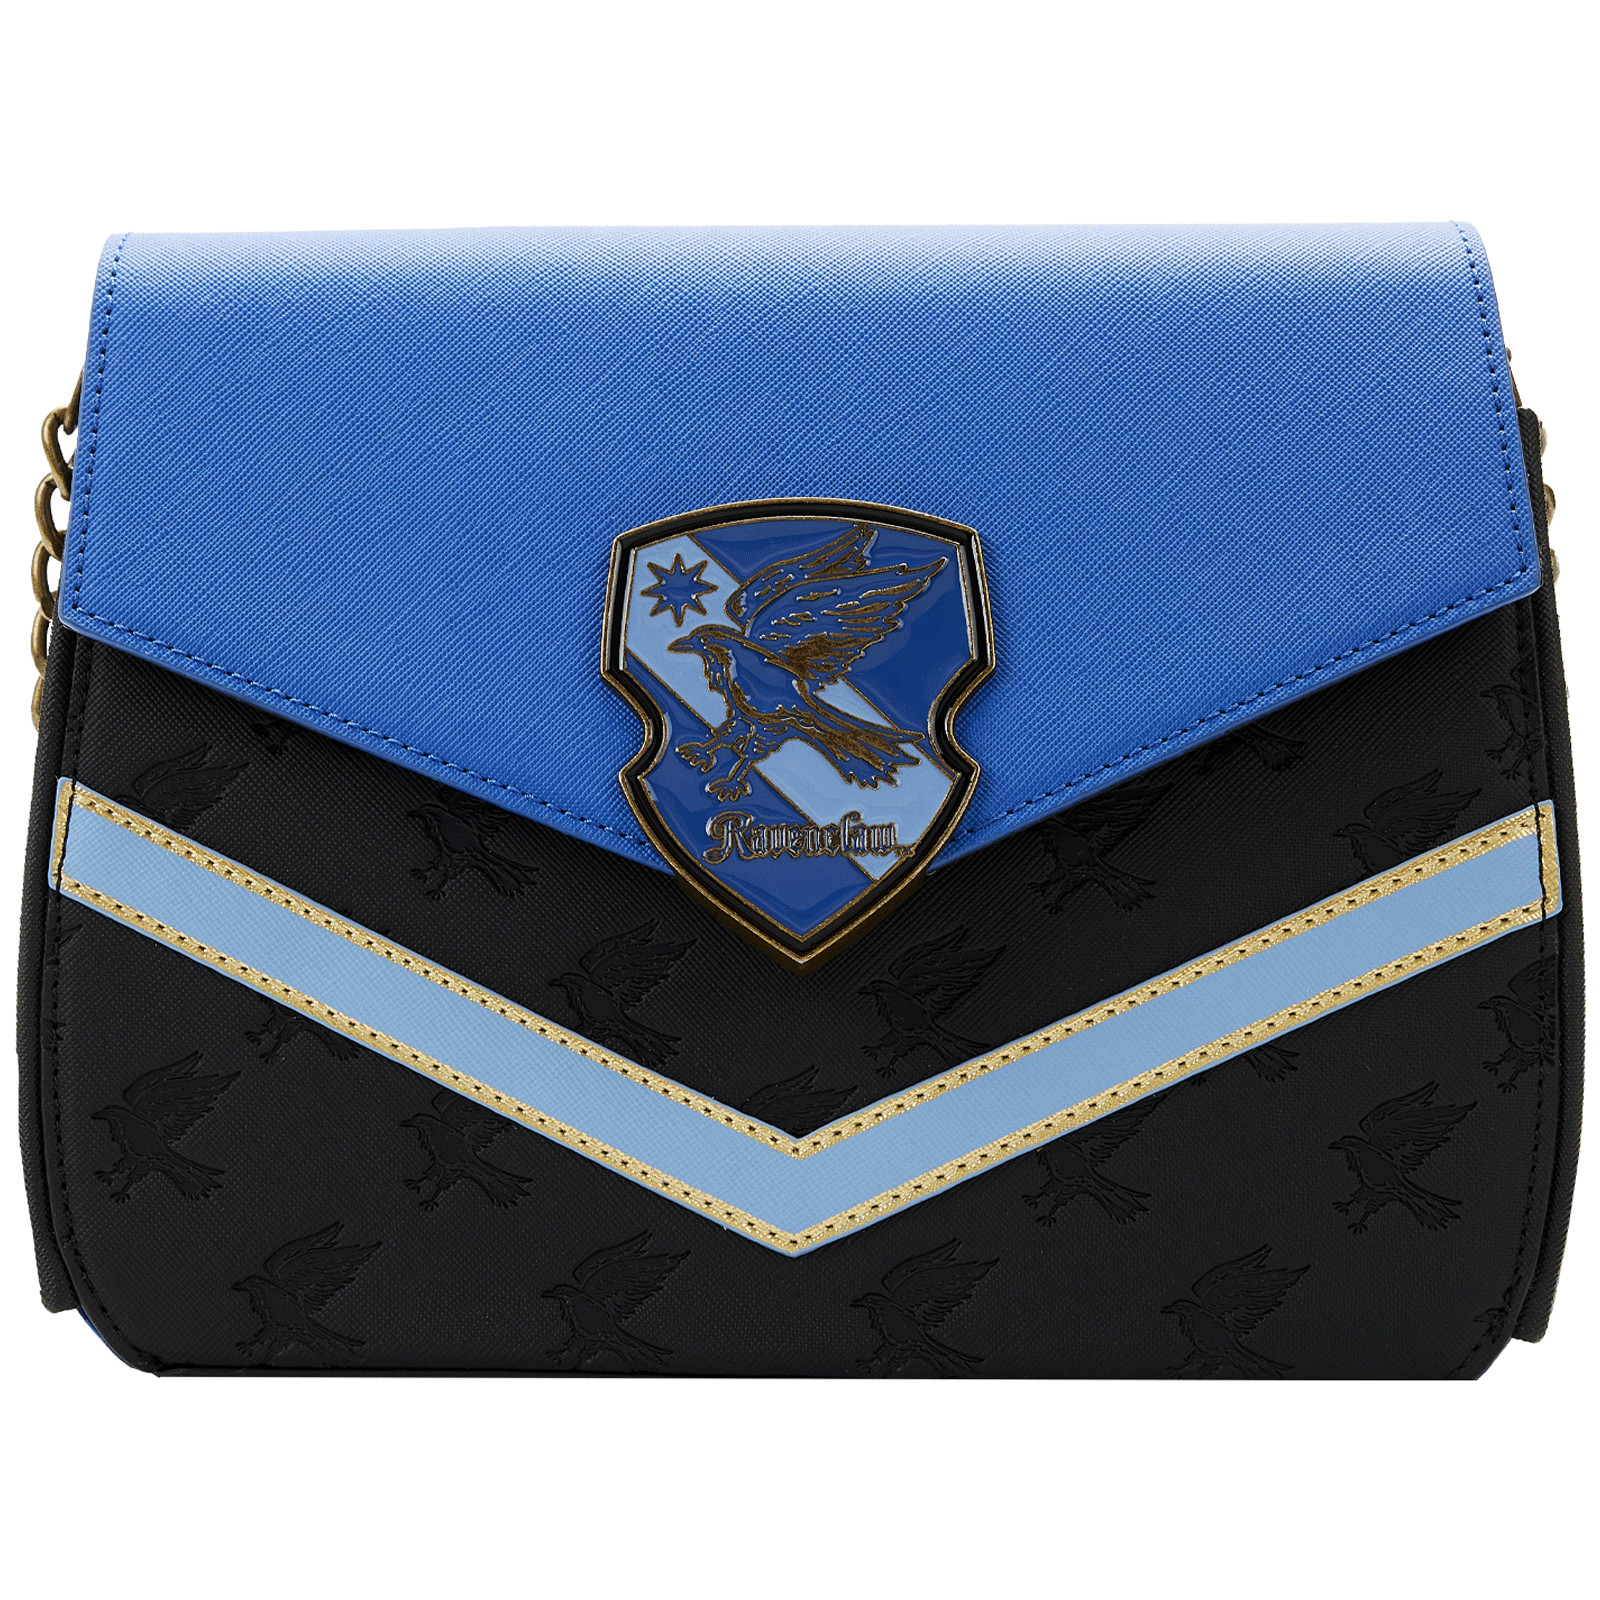 Loungefly x Harry Potter Ravenclaw Chain Strap Crossbody Bag